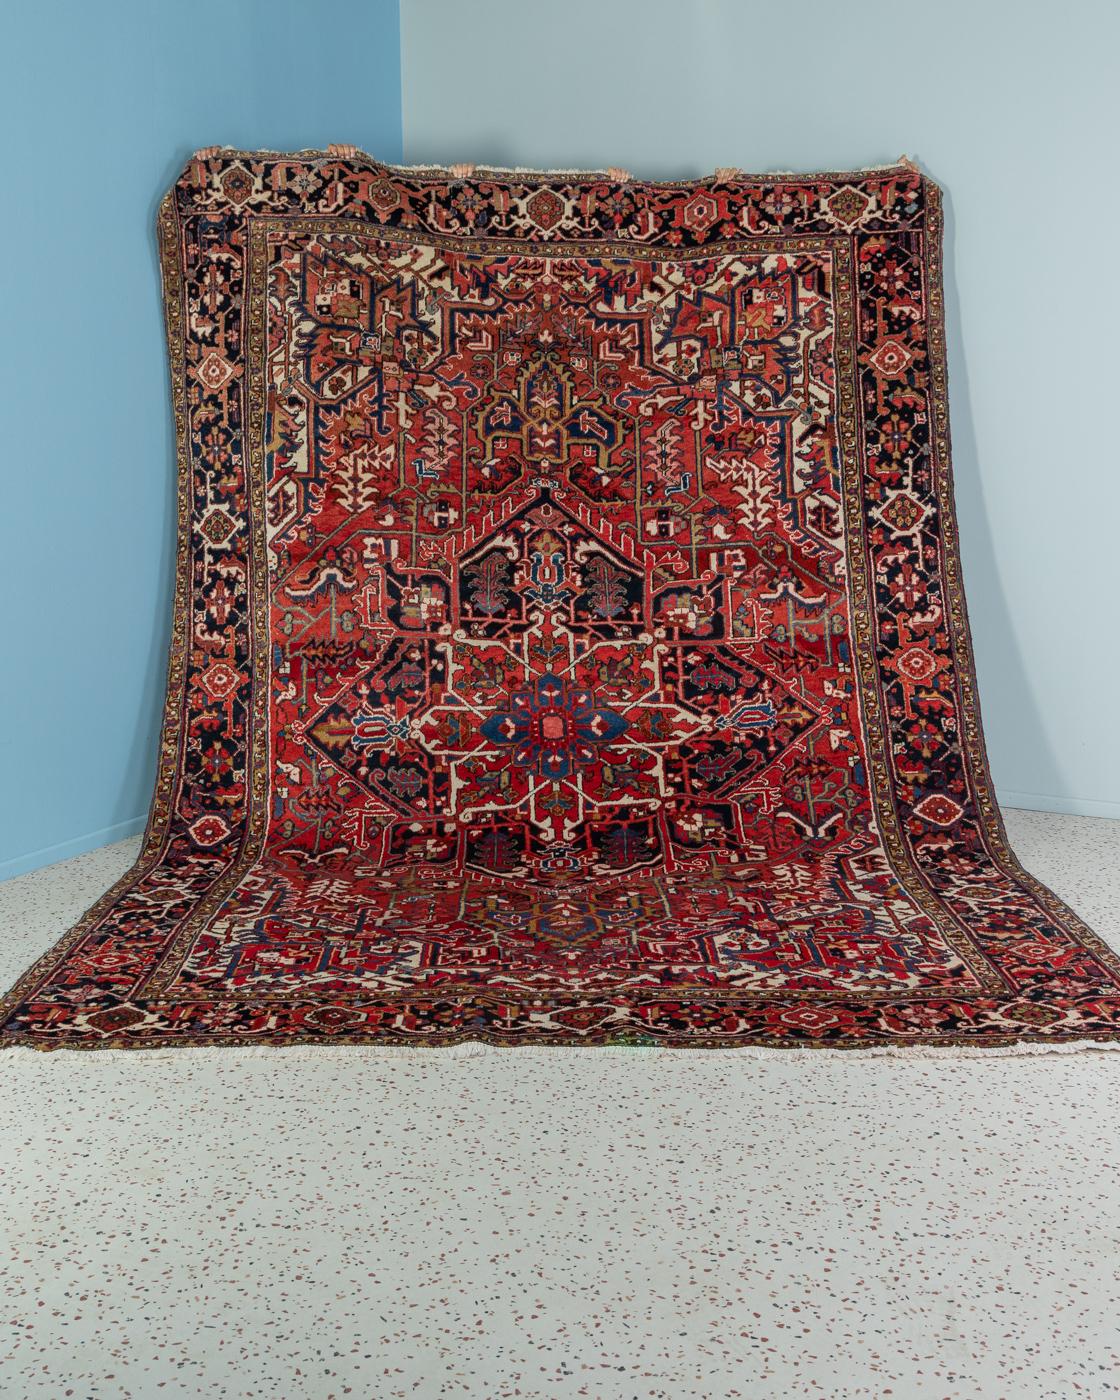 Classic rug from the 1960s, from the city of Heriz in northwestern Persia. High-quality pile in shades of red, orange, dark blue, cream and beige.

Quality Features:
 Heriz carpet
 Hand knotted
 approx. 160,000 knots per m2
 50-60 years old
